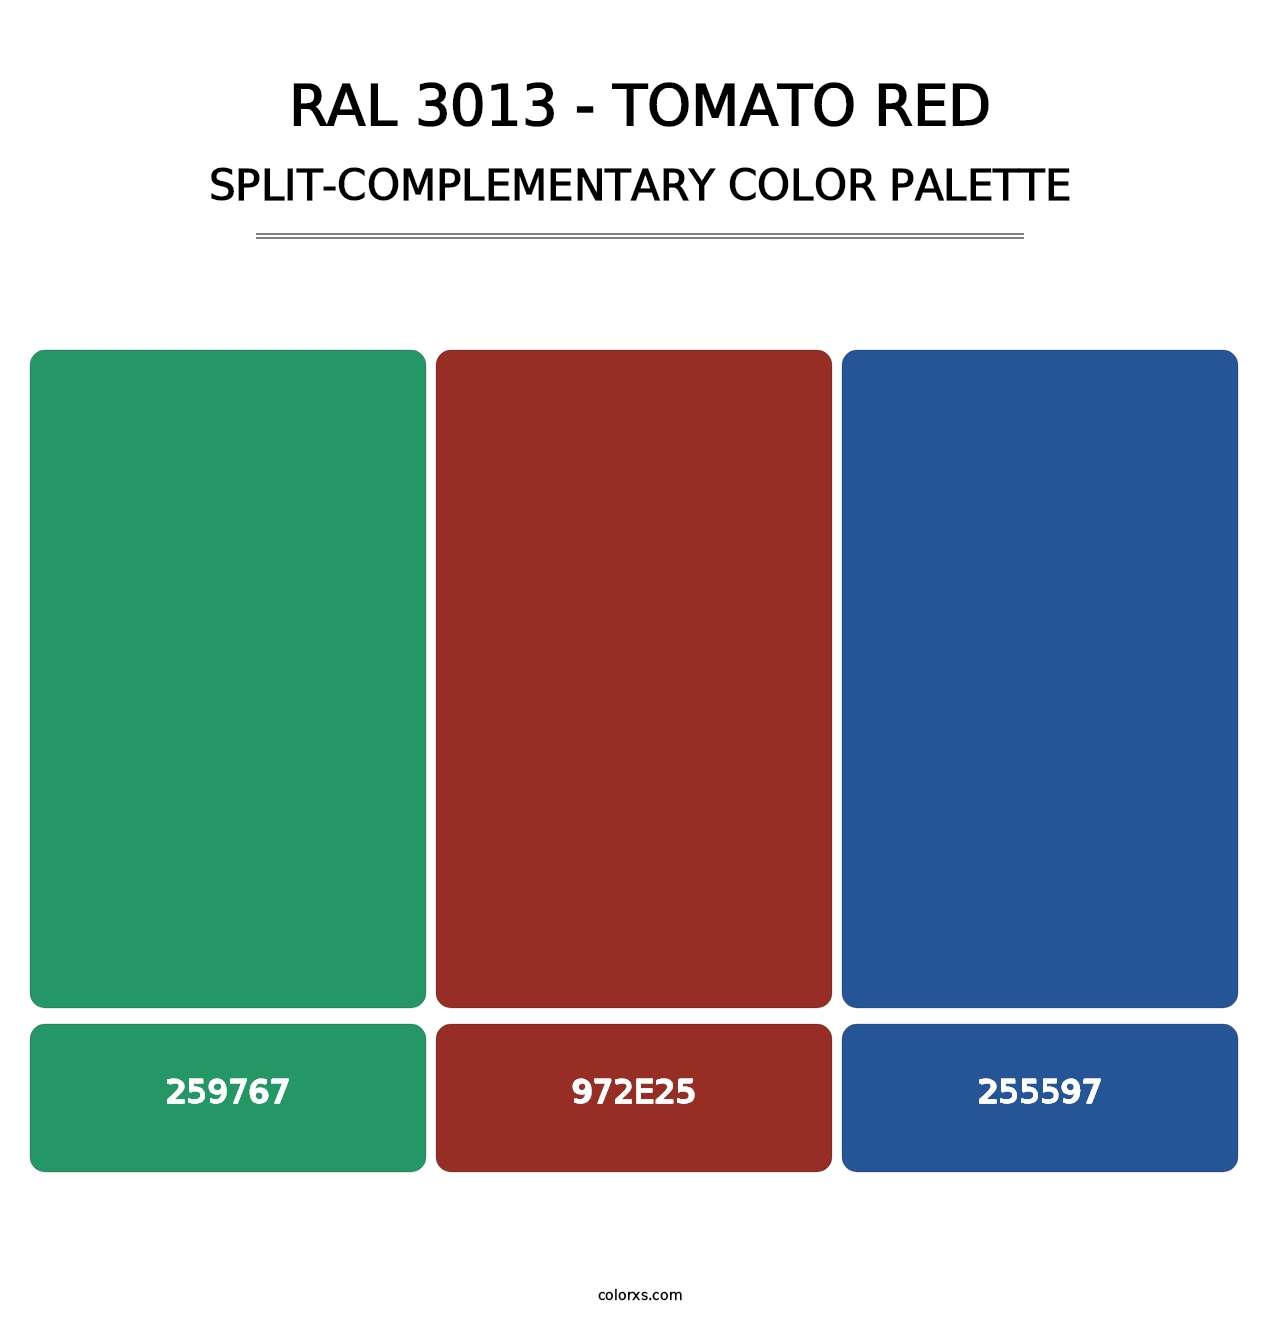 RAL 3013 - Tomato Red - Split-Complementary Color Palette